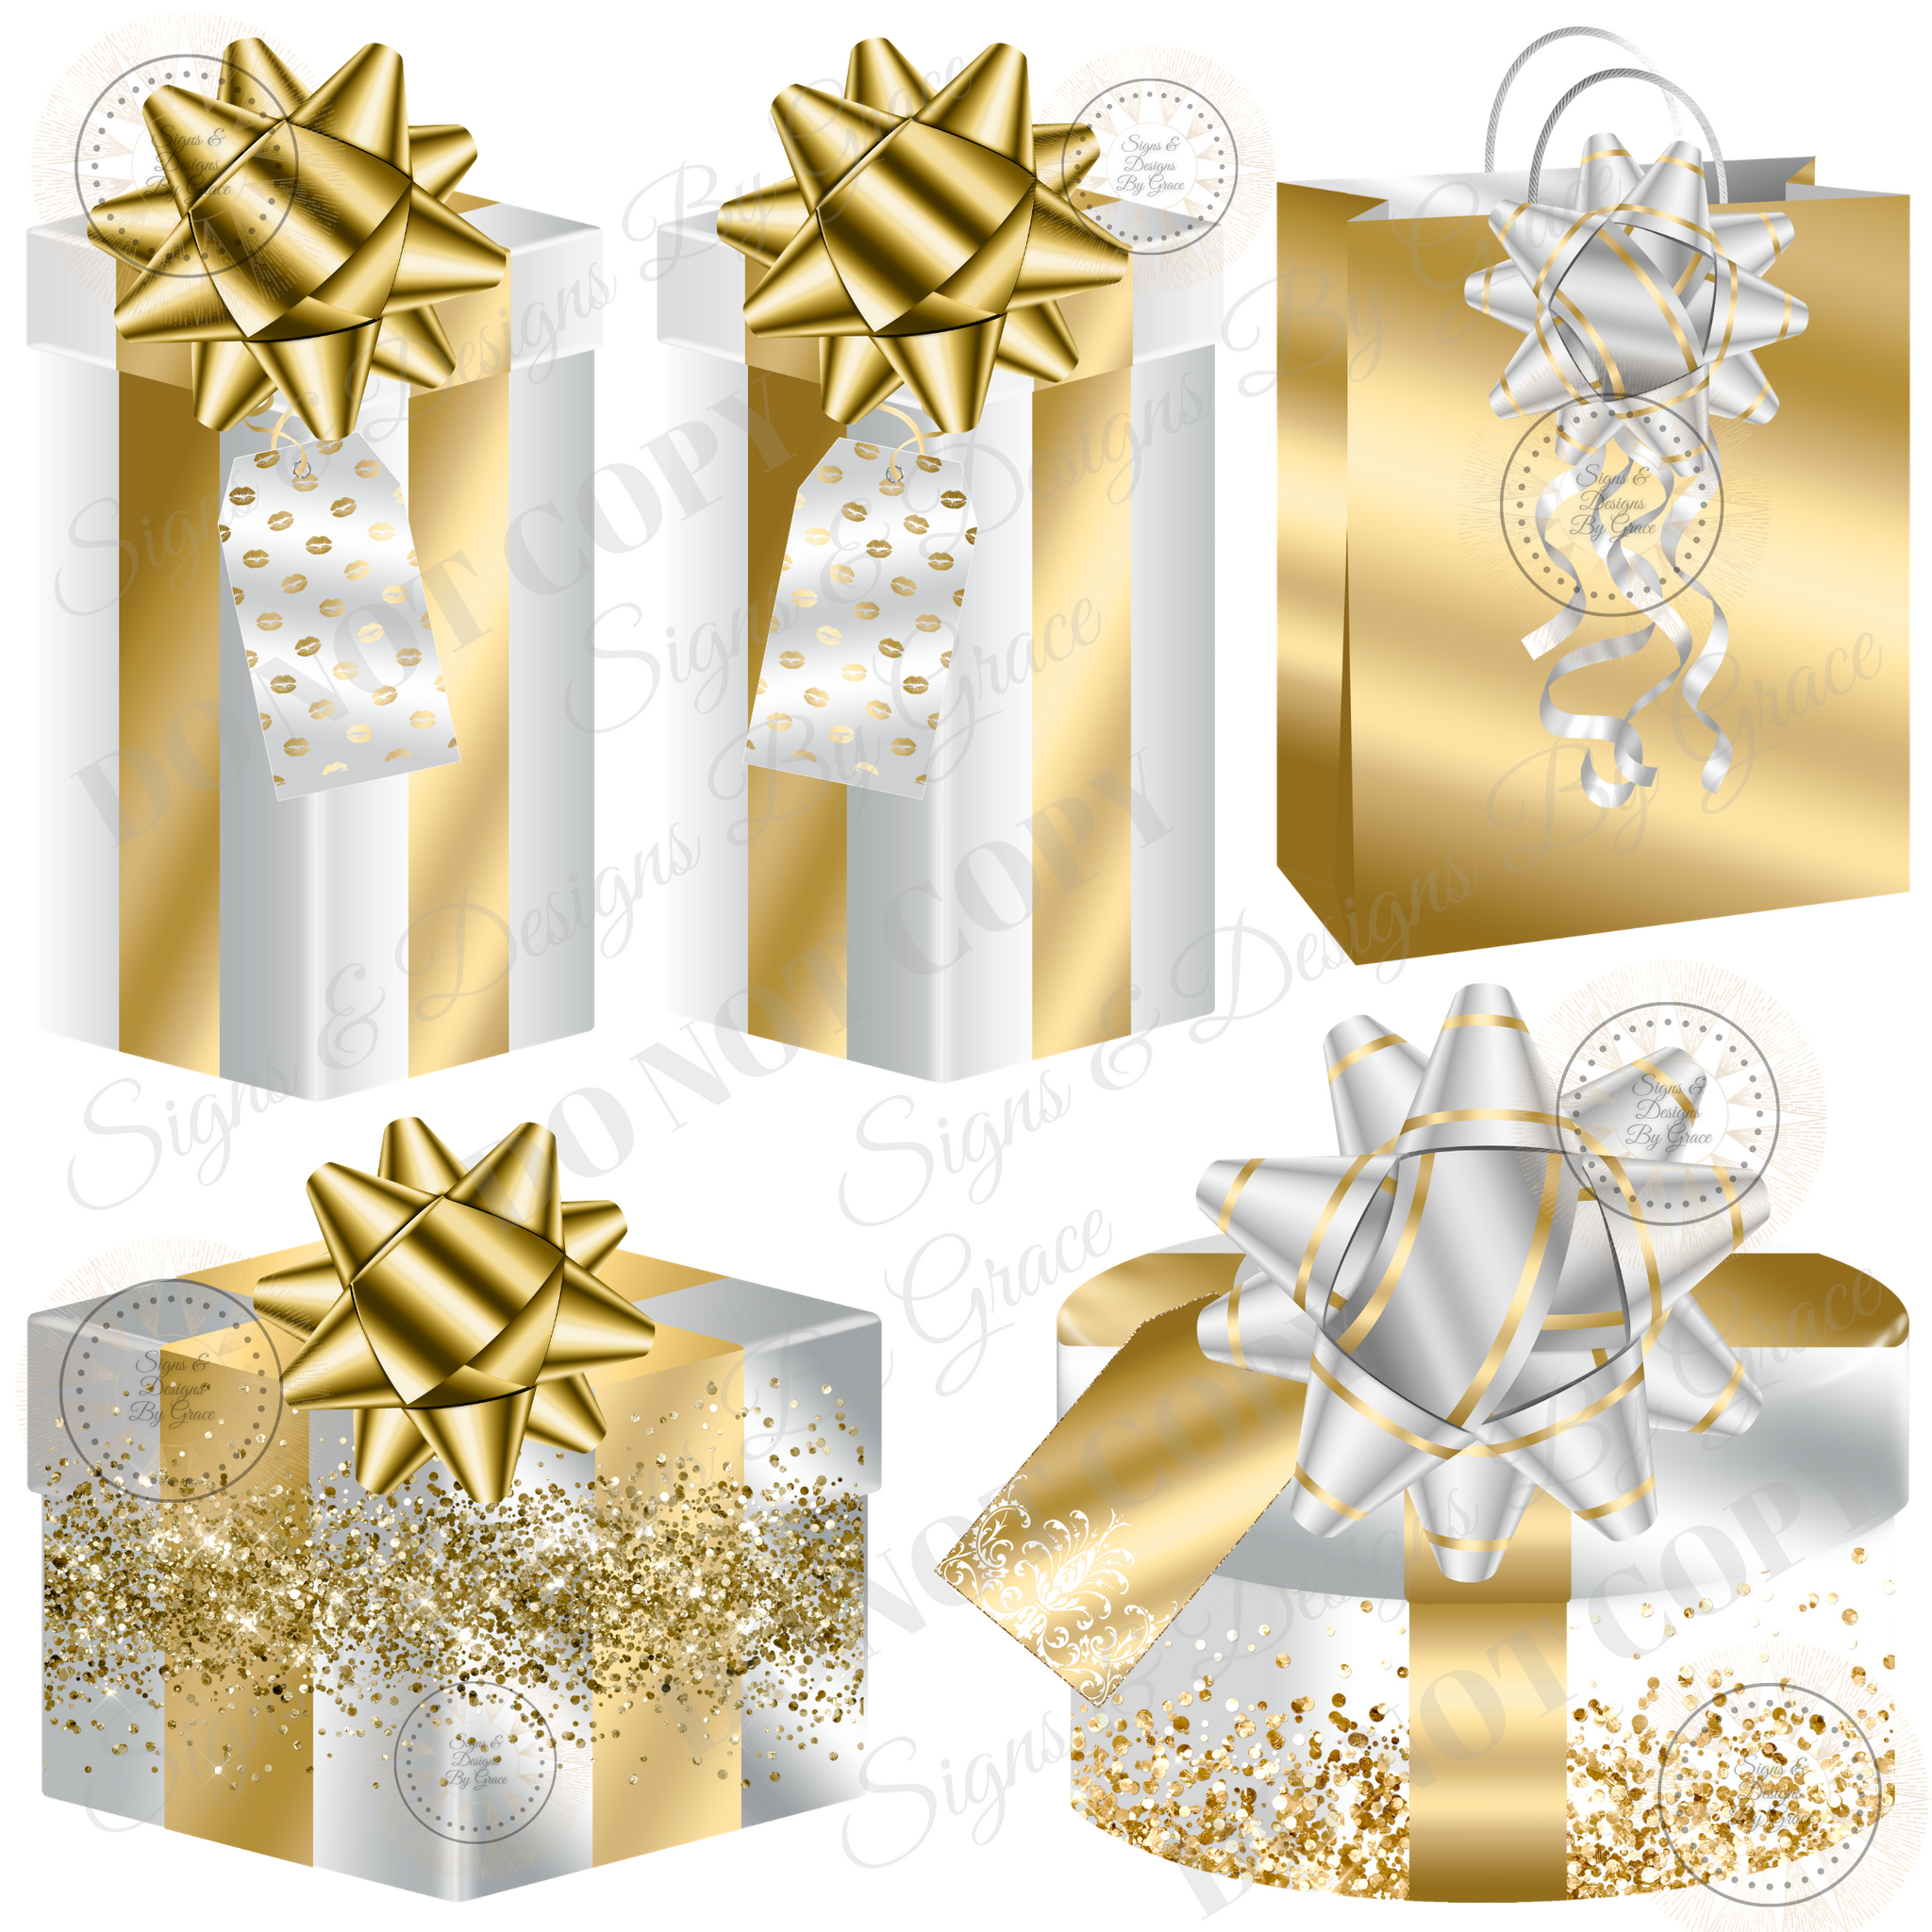 CUT white gold gifts boxes 708